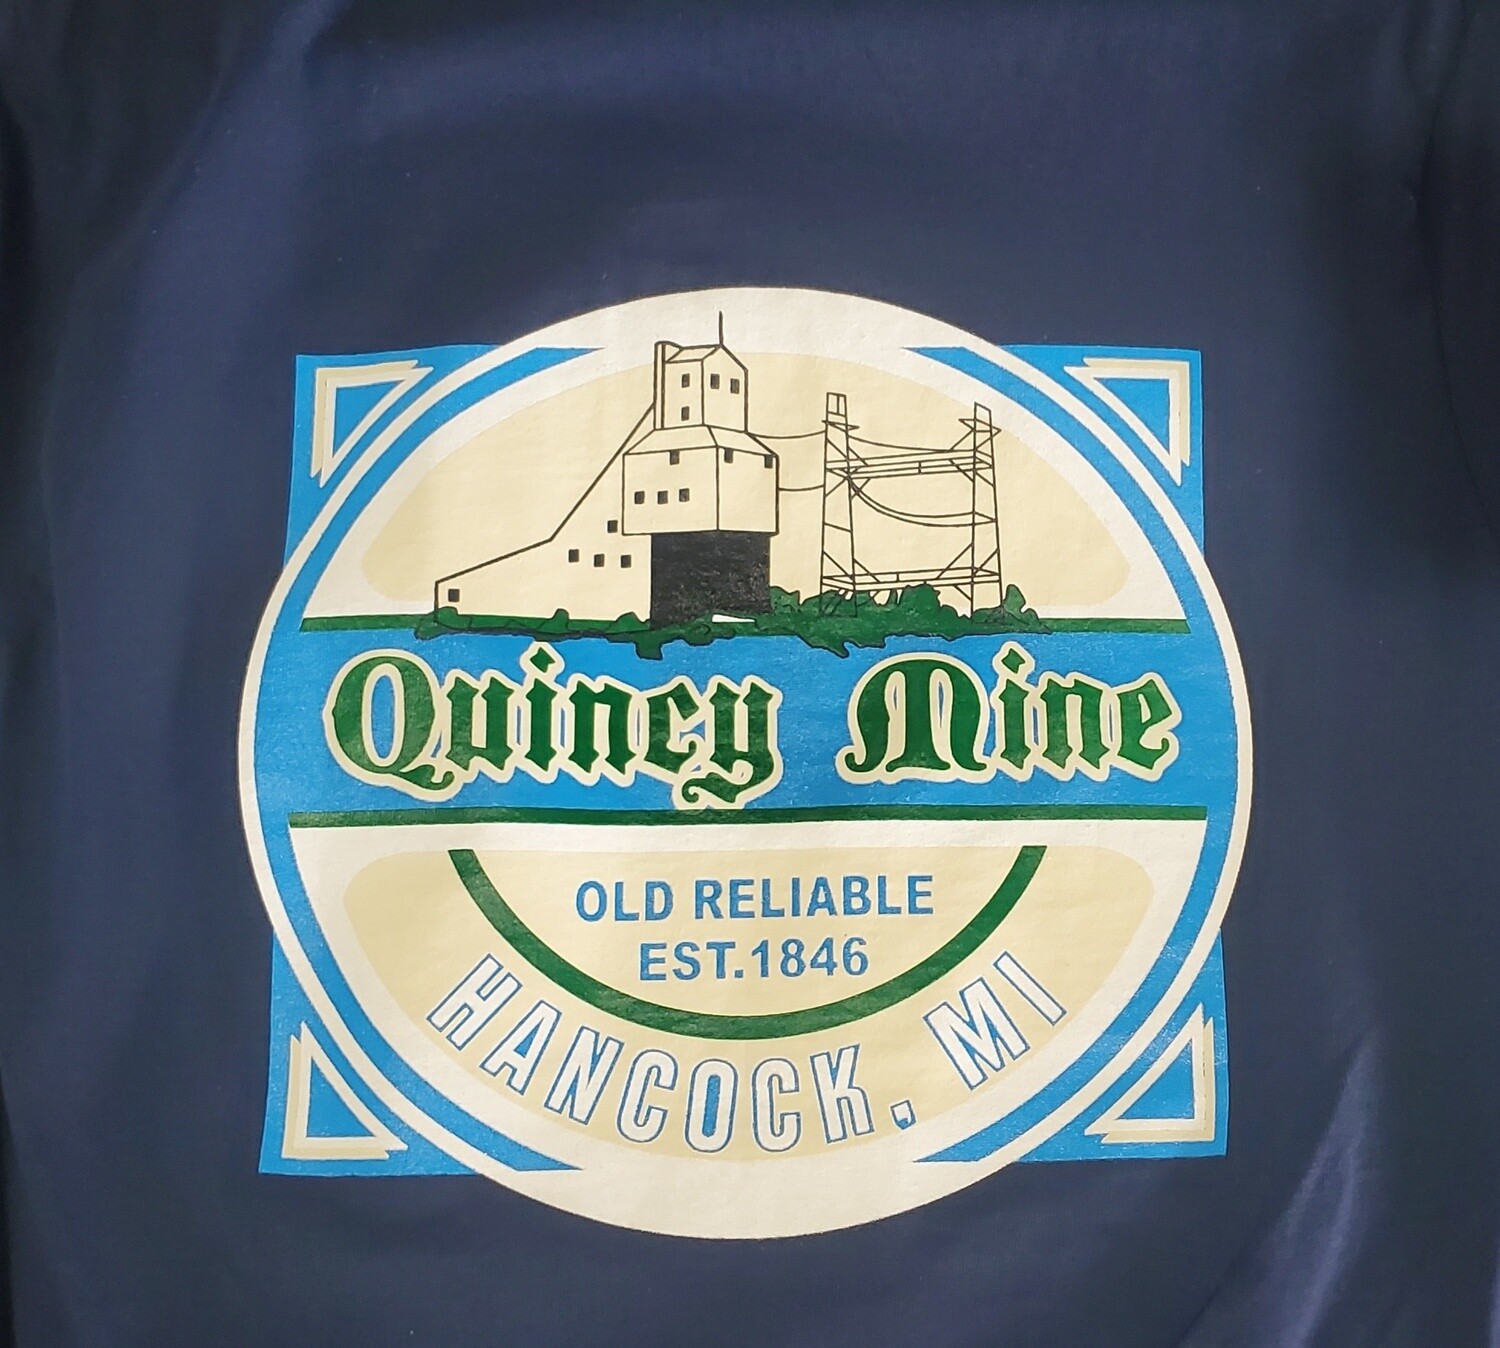 Quincy Mine Old Reliable Design, Type: T-Shirt, Colour: Navy, Size: Adult S